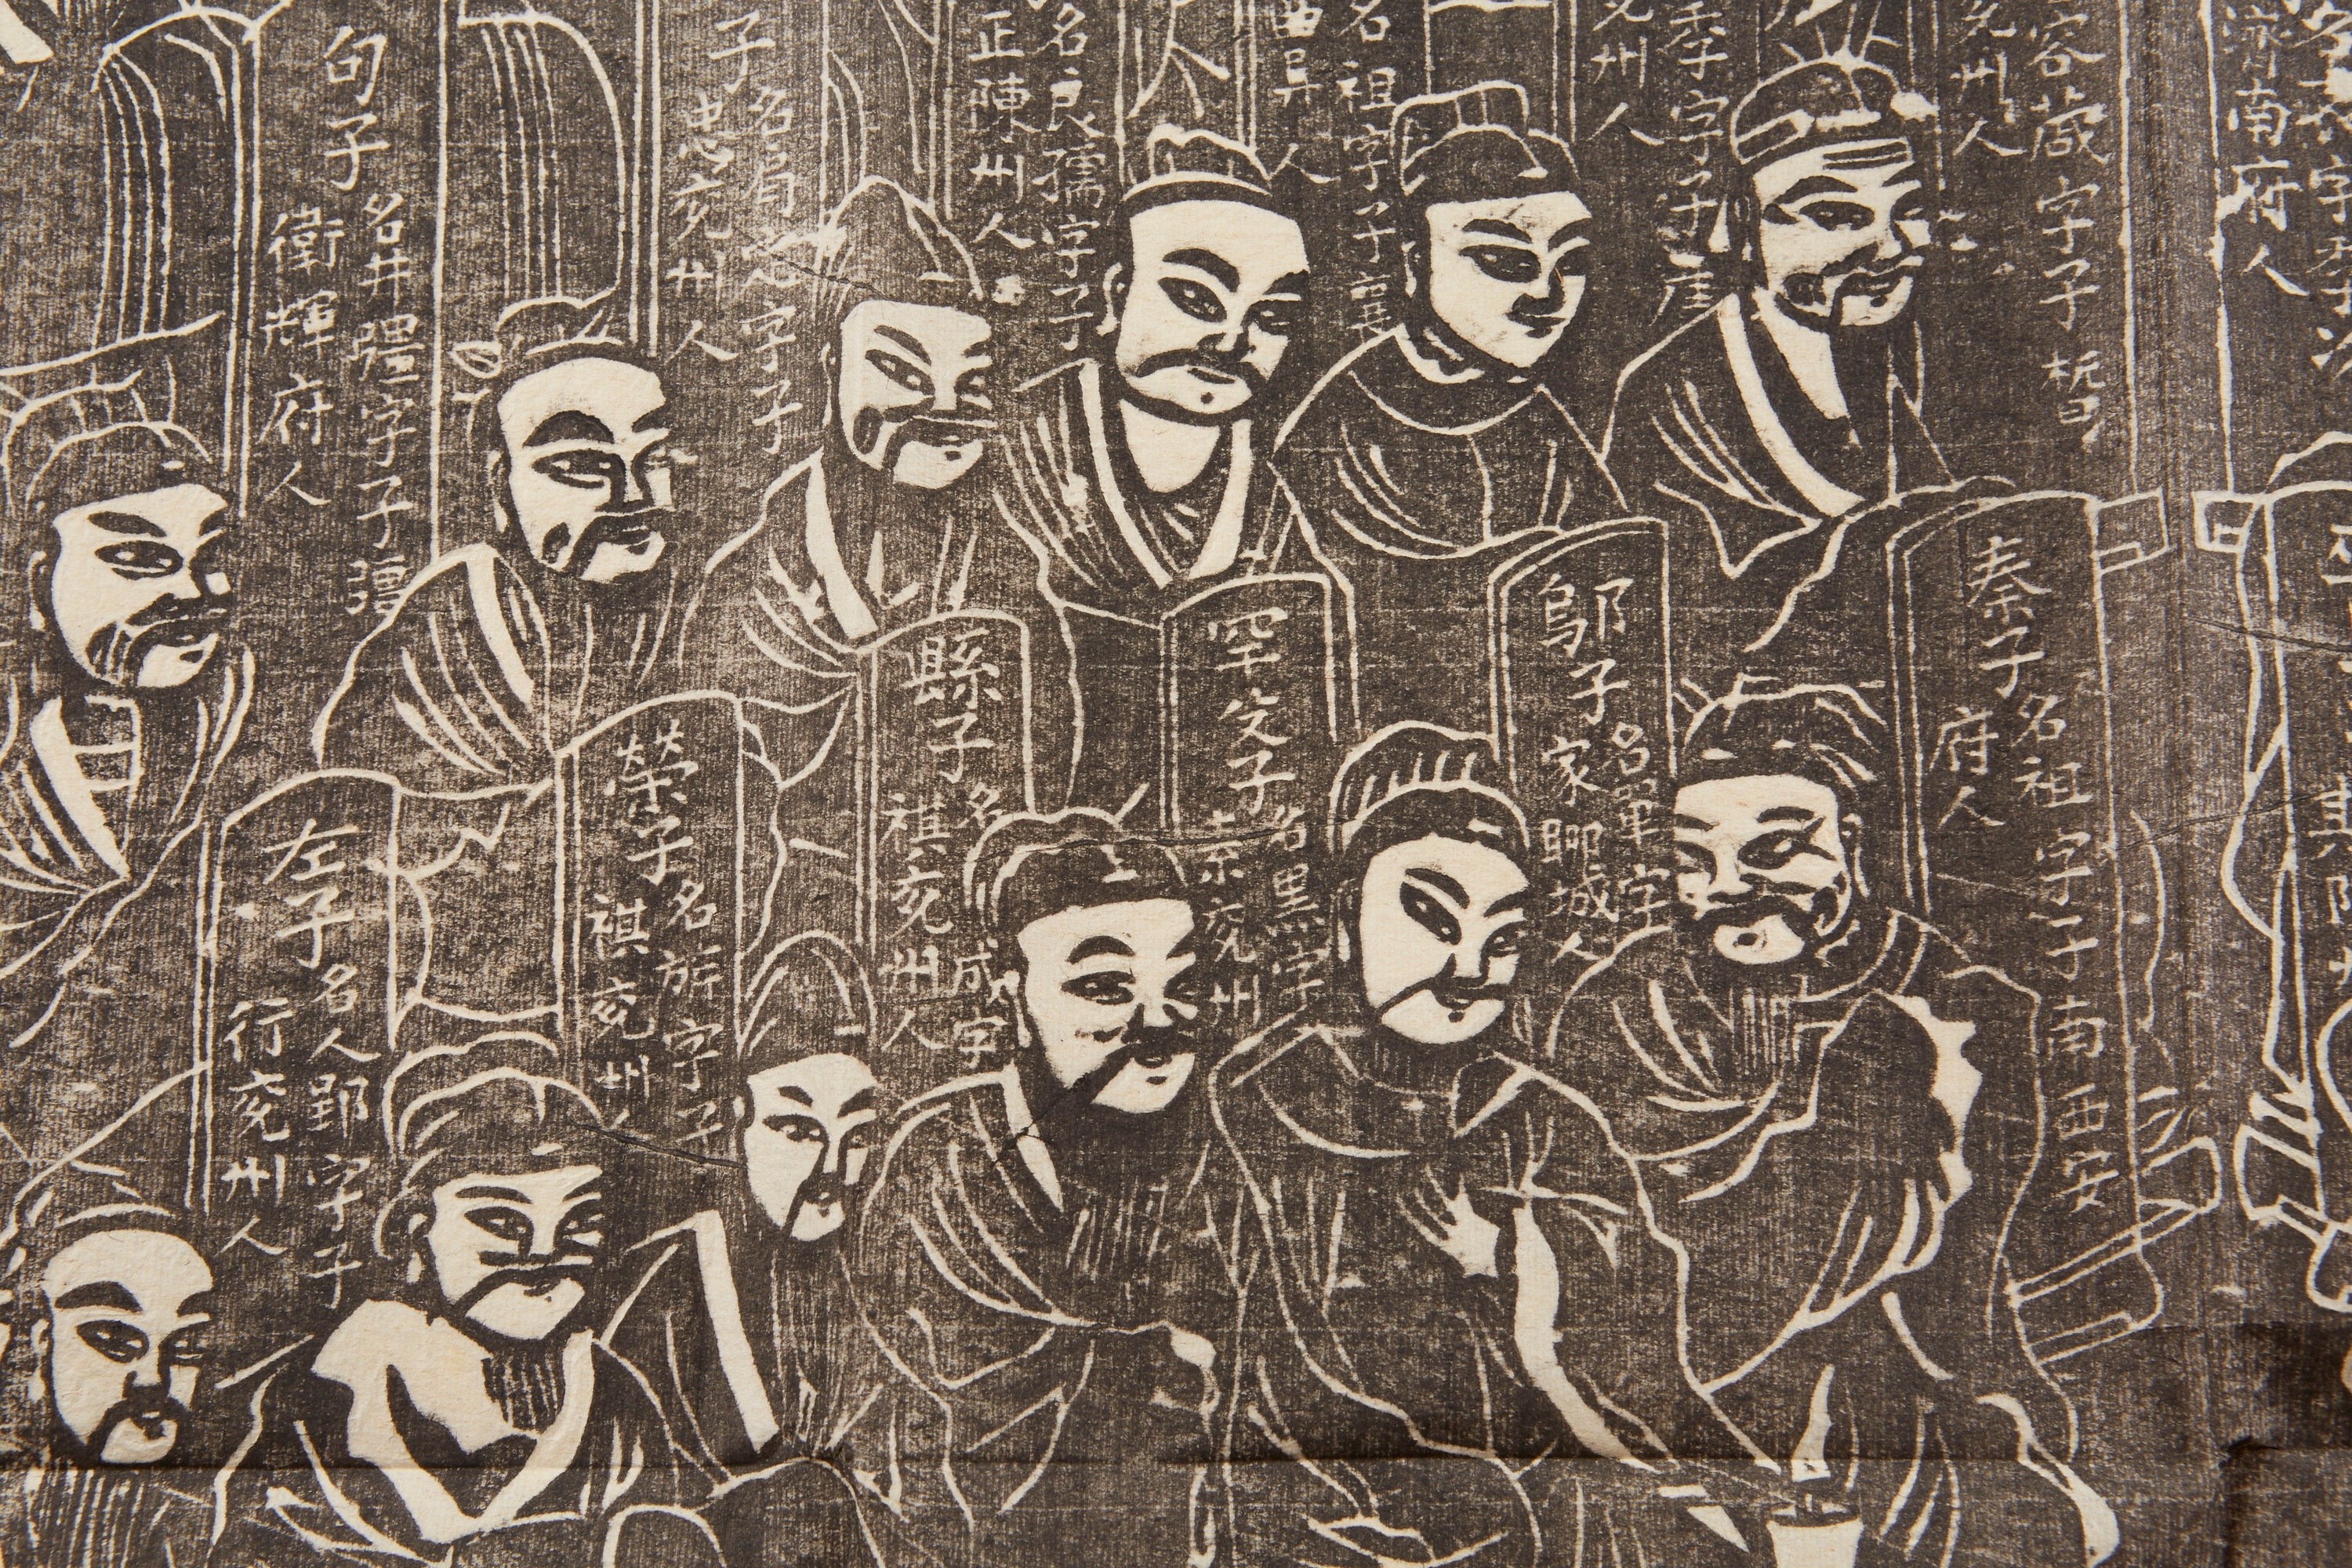 Group of Chinese Buddhist Temple Rubbings - Image 7 of 10